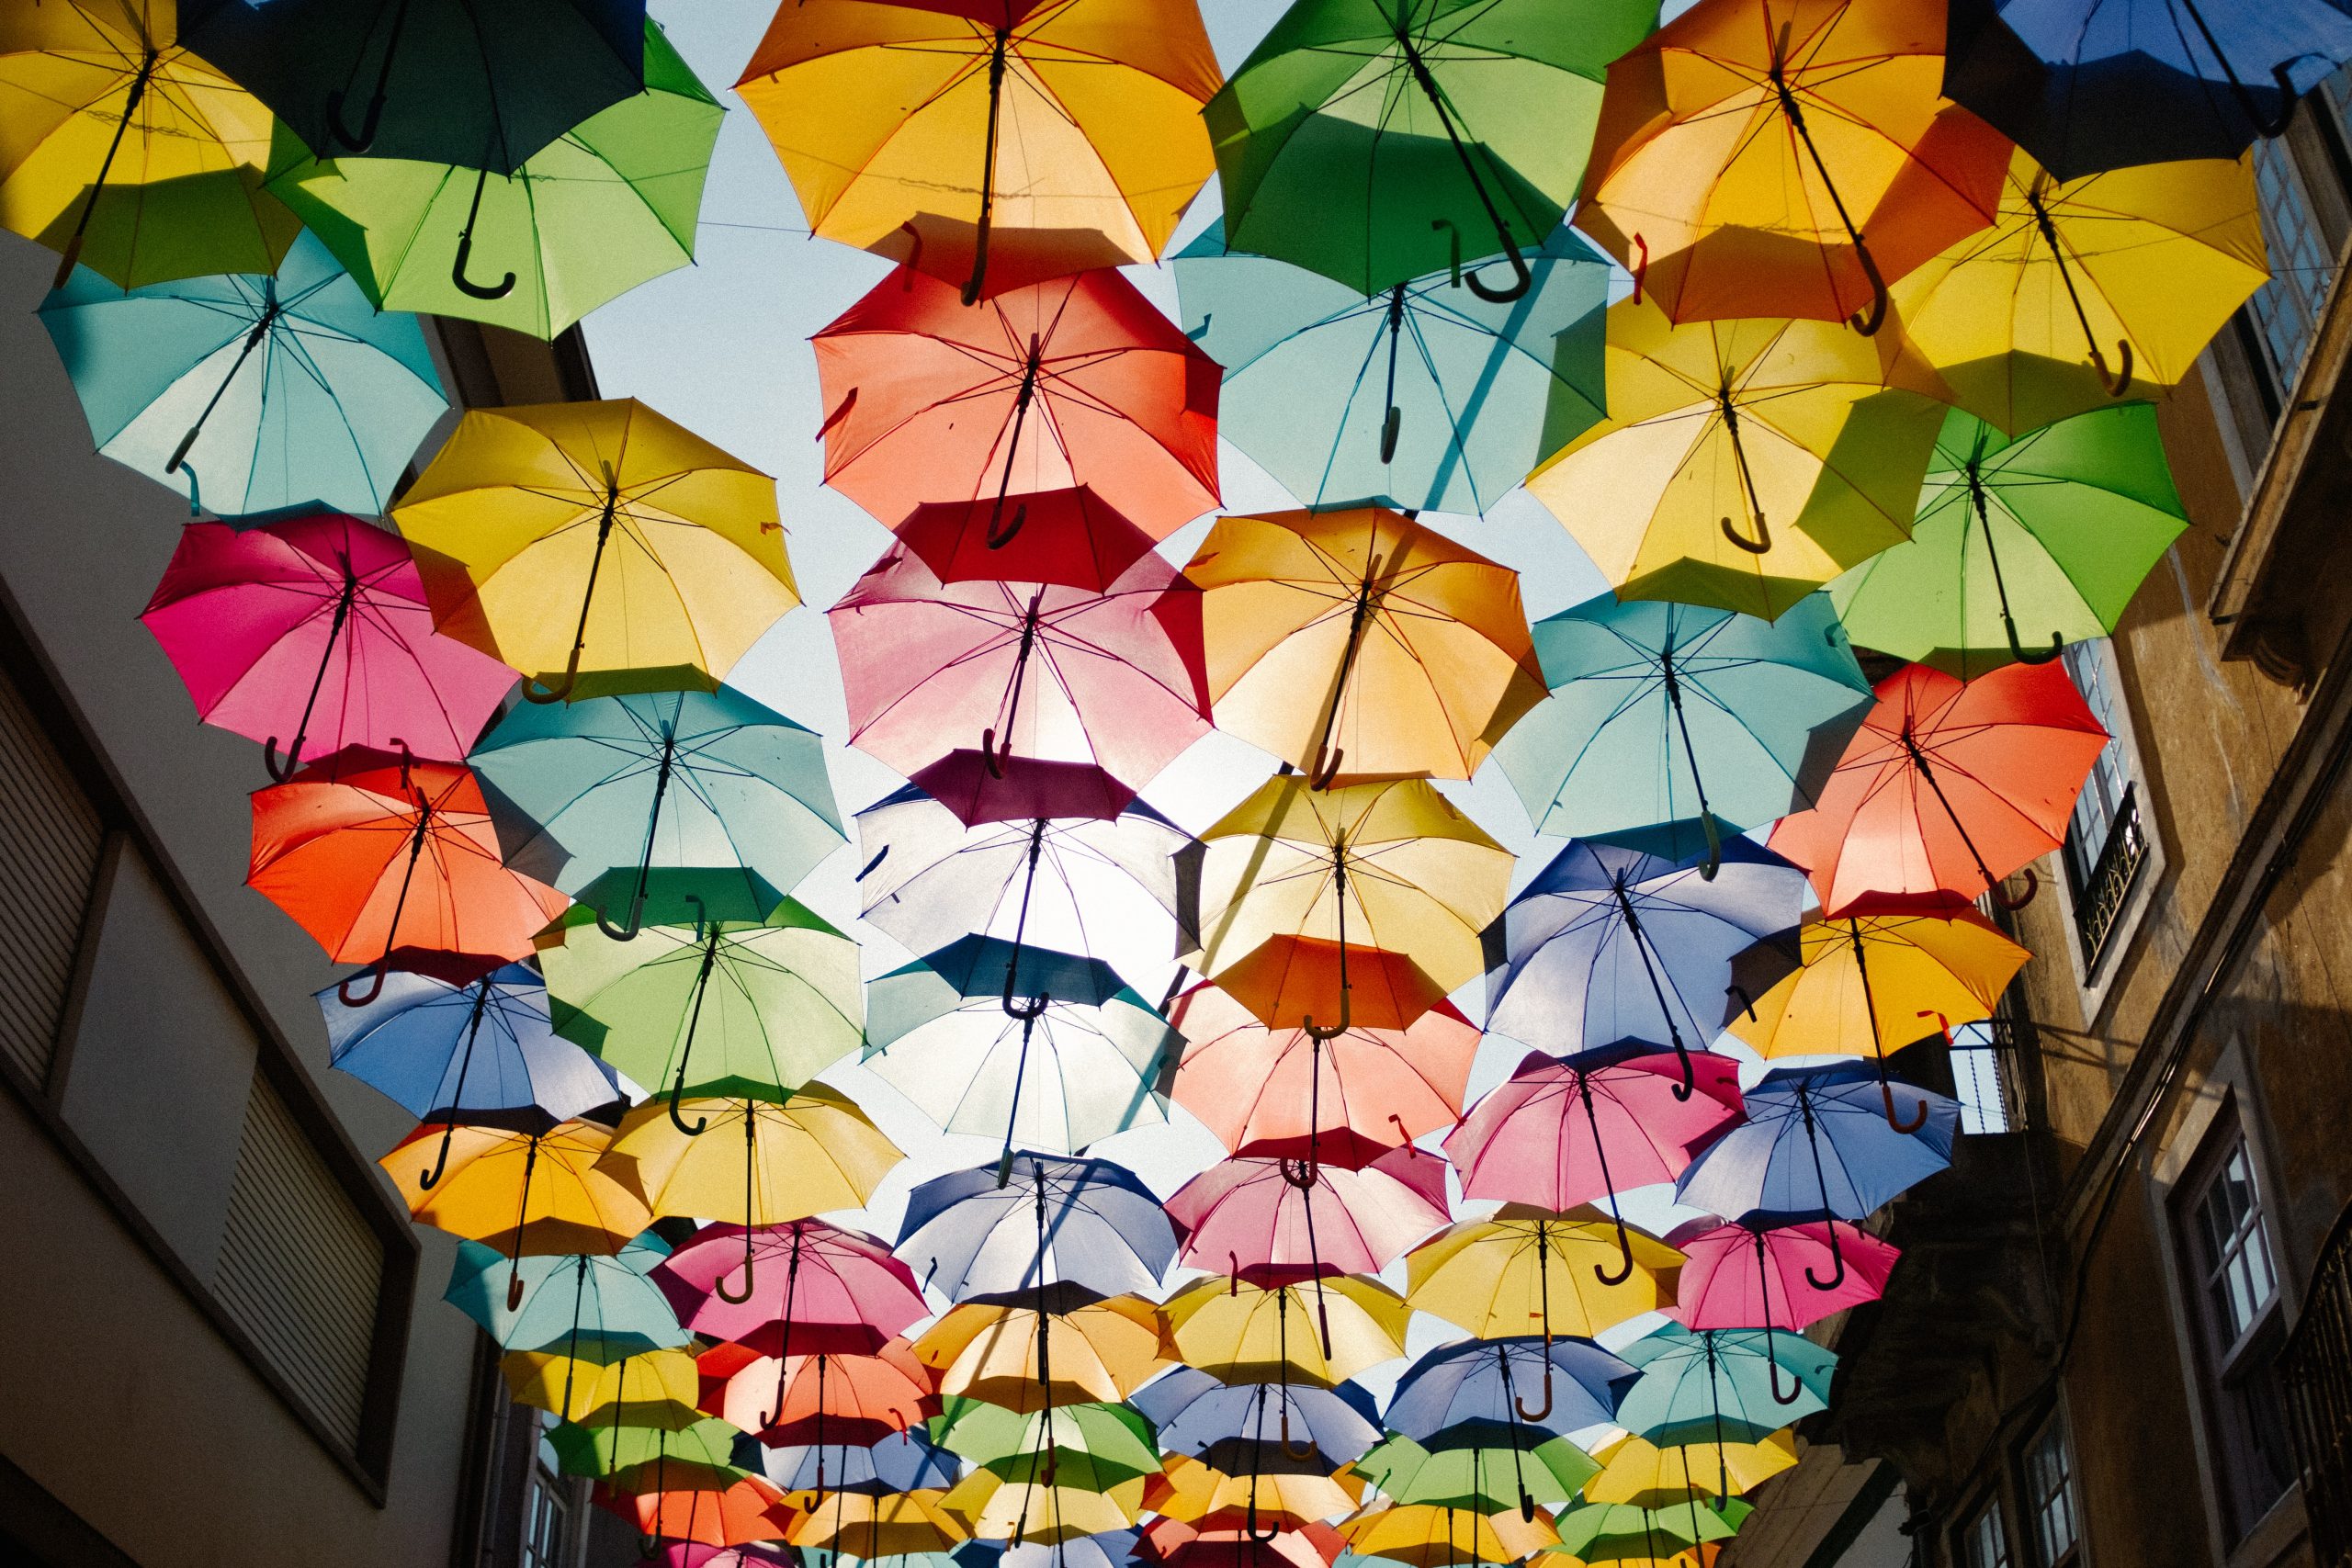 instalation of colourful umbrellas protecting a street